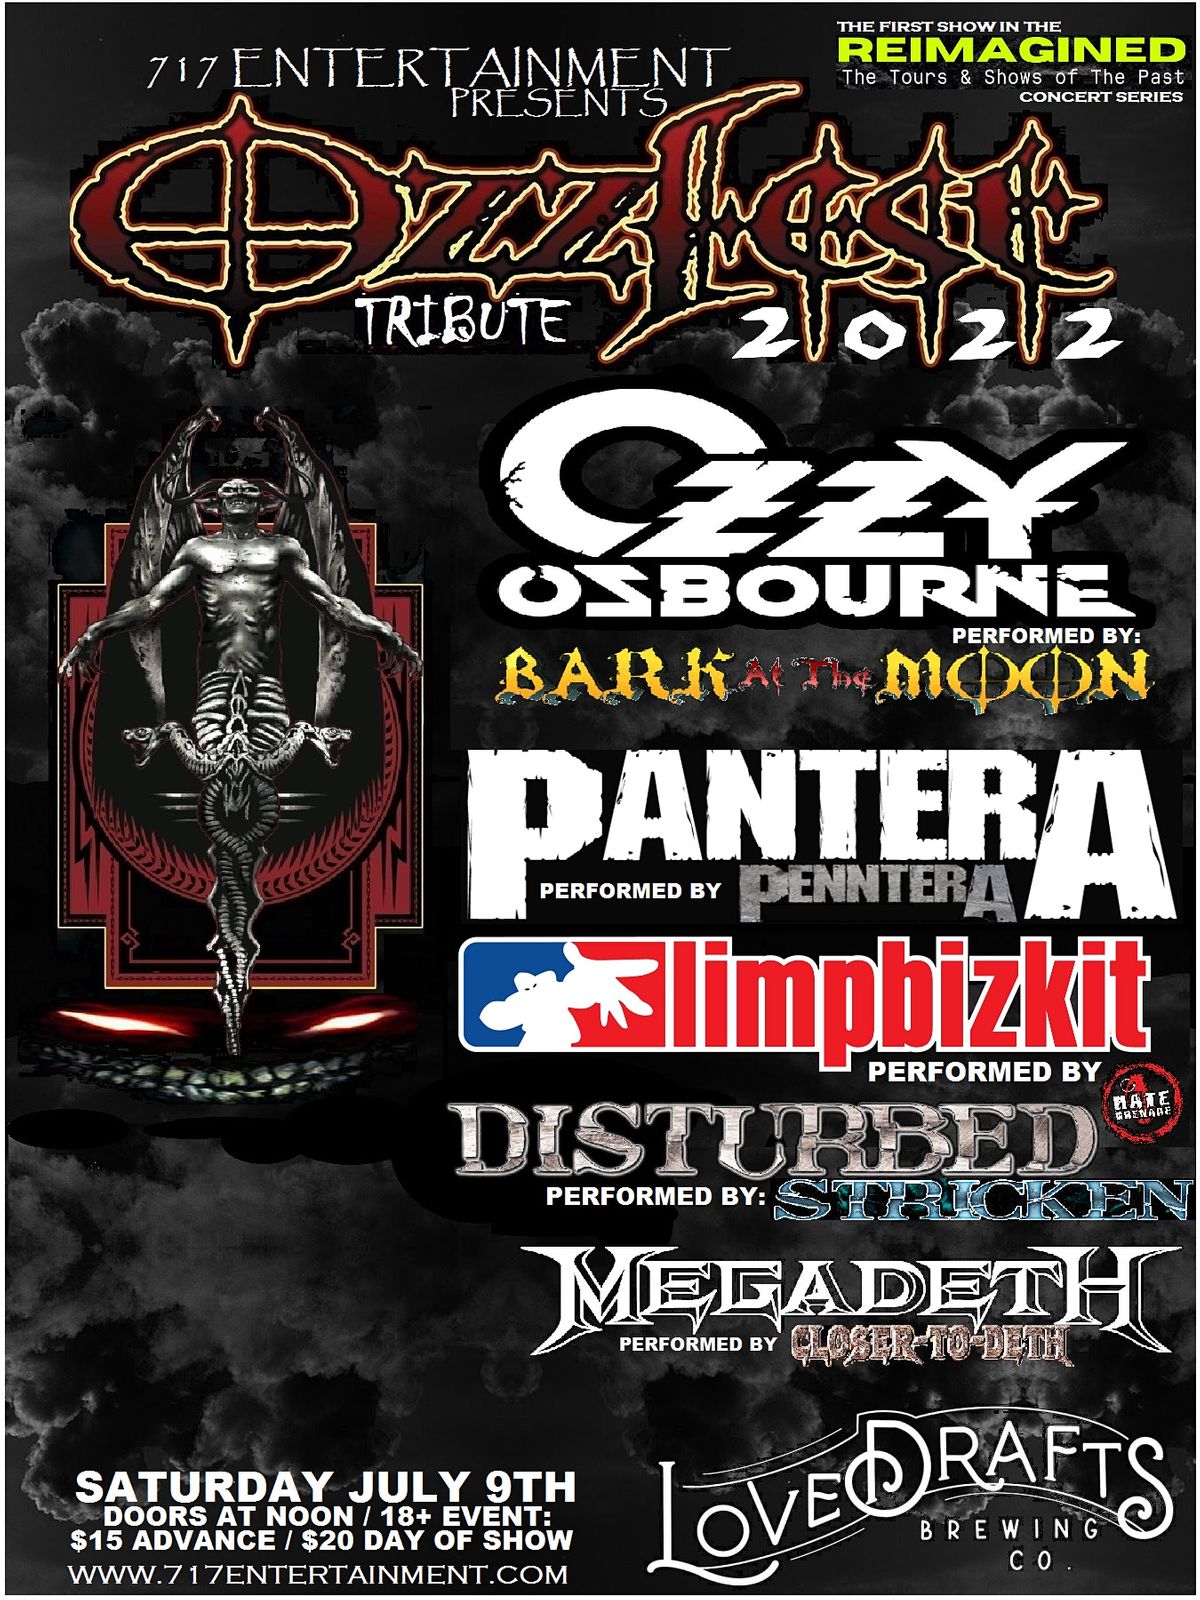 Ozzfest Tribute Show w/ Bark at The Moon Lovedraft's Brewing Co